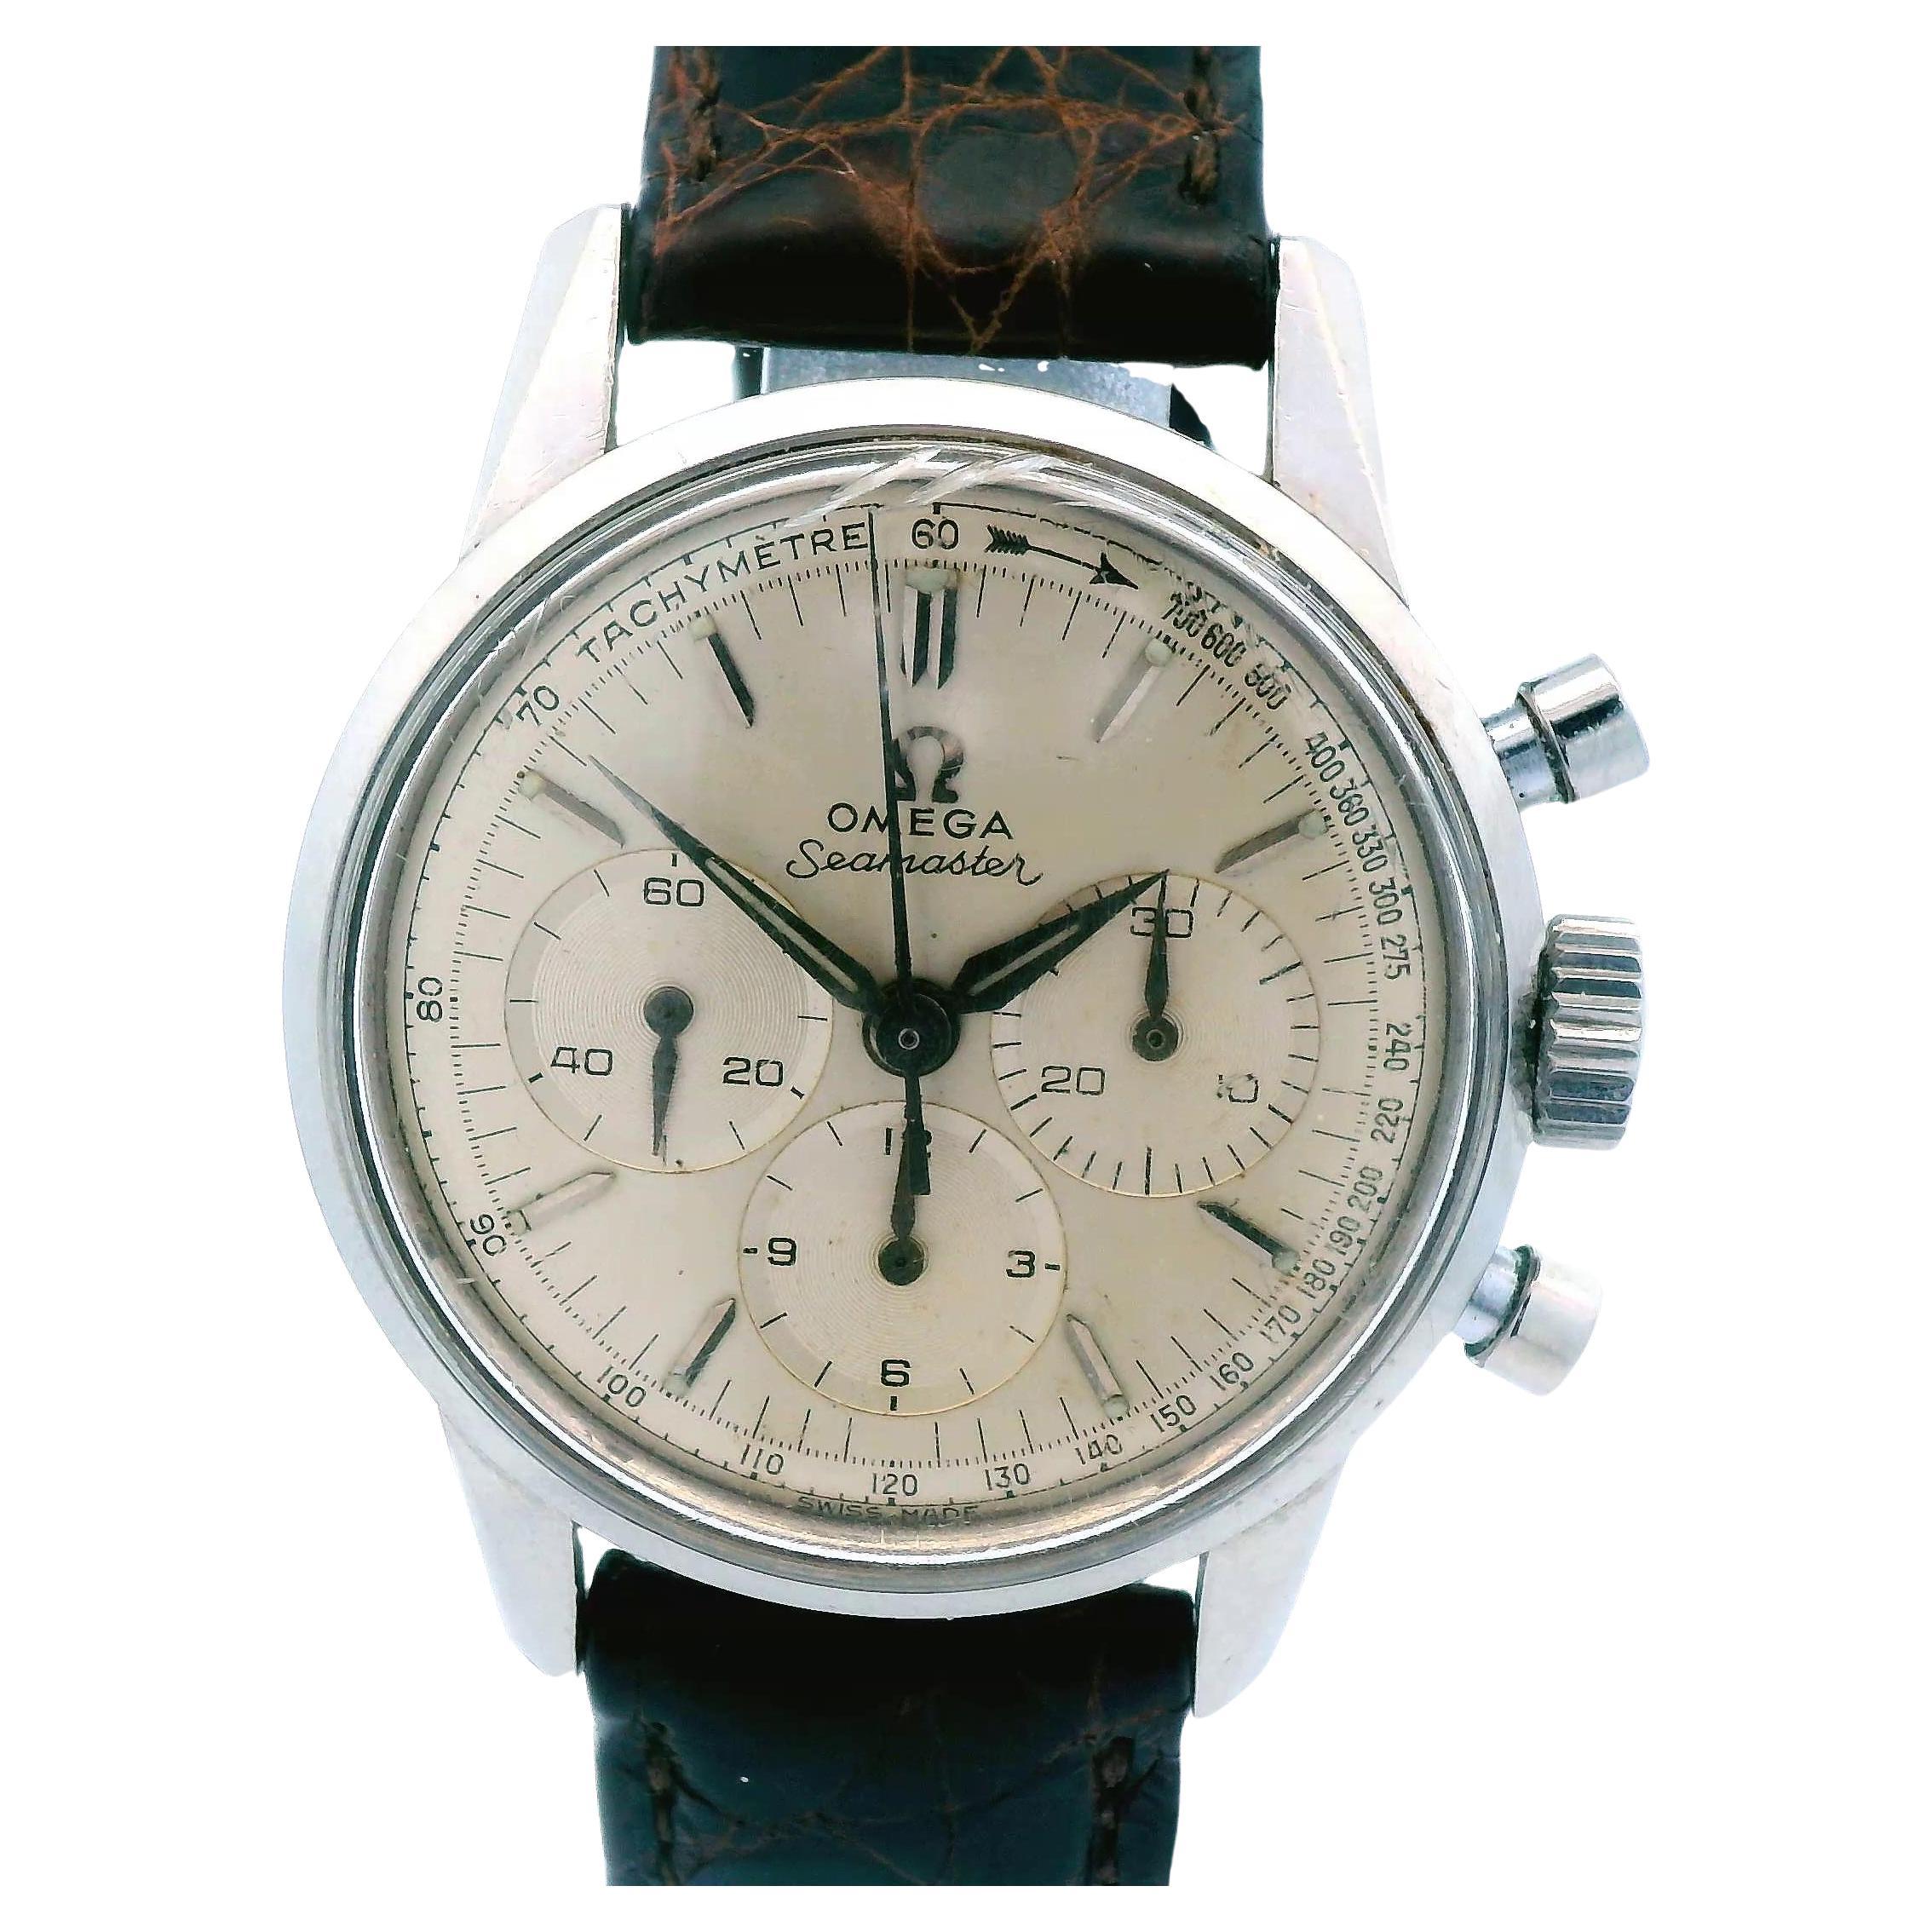 1960s Omega Seamaster Chronograph Watch in Stainless Steel - Running For Sale